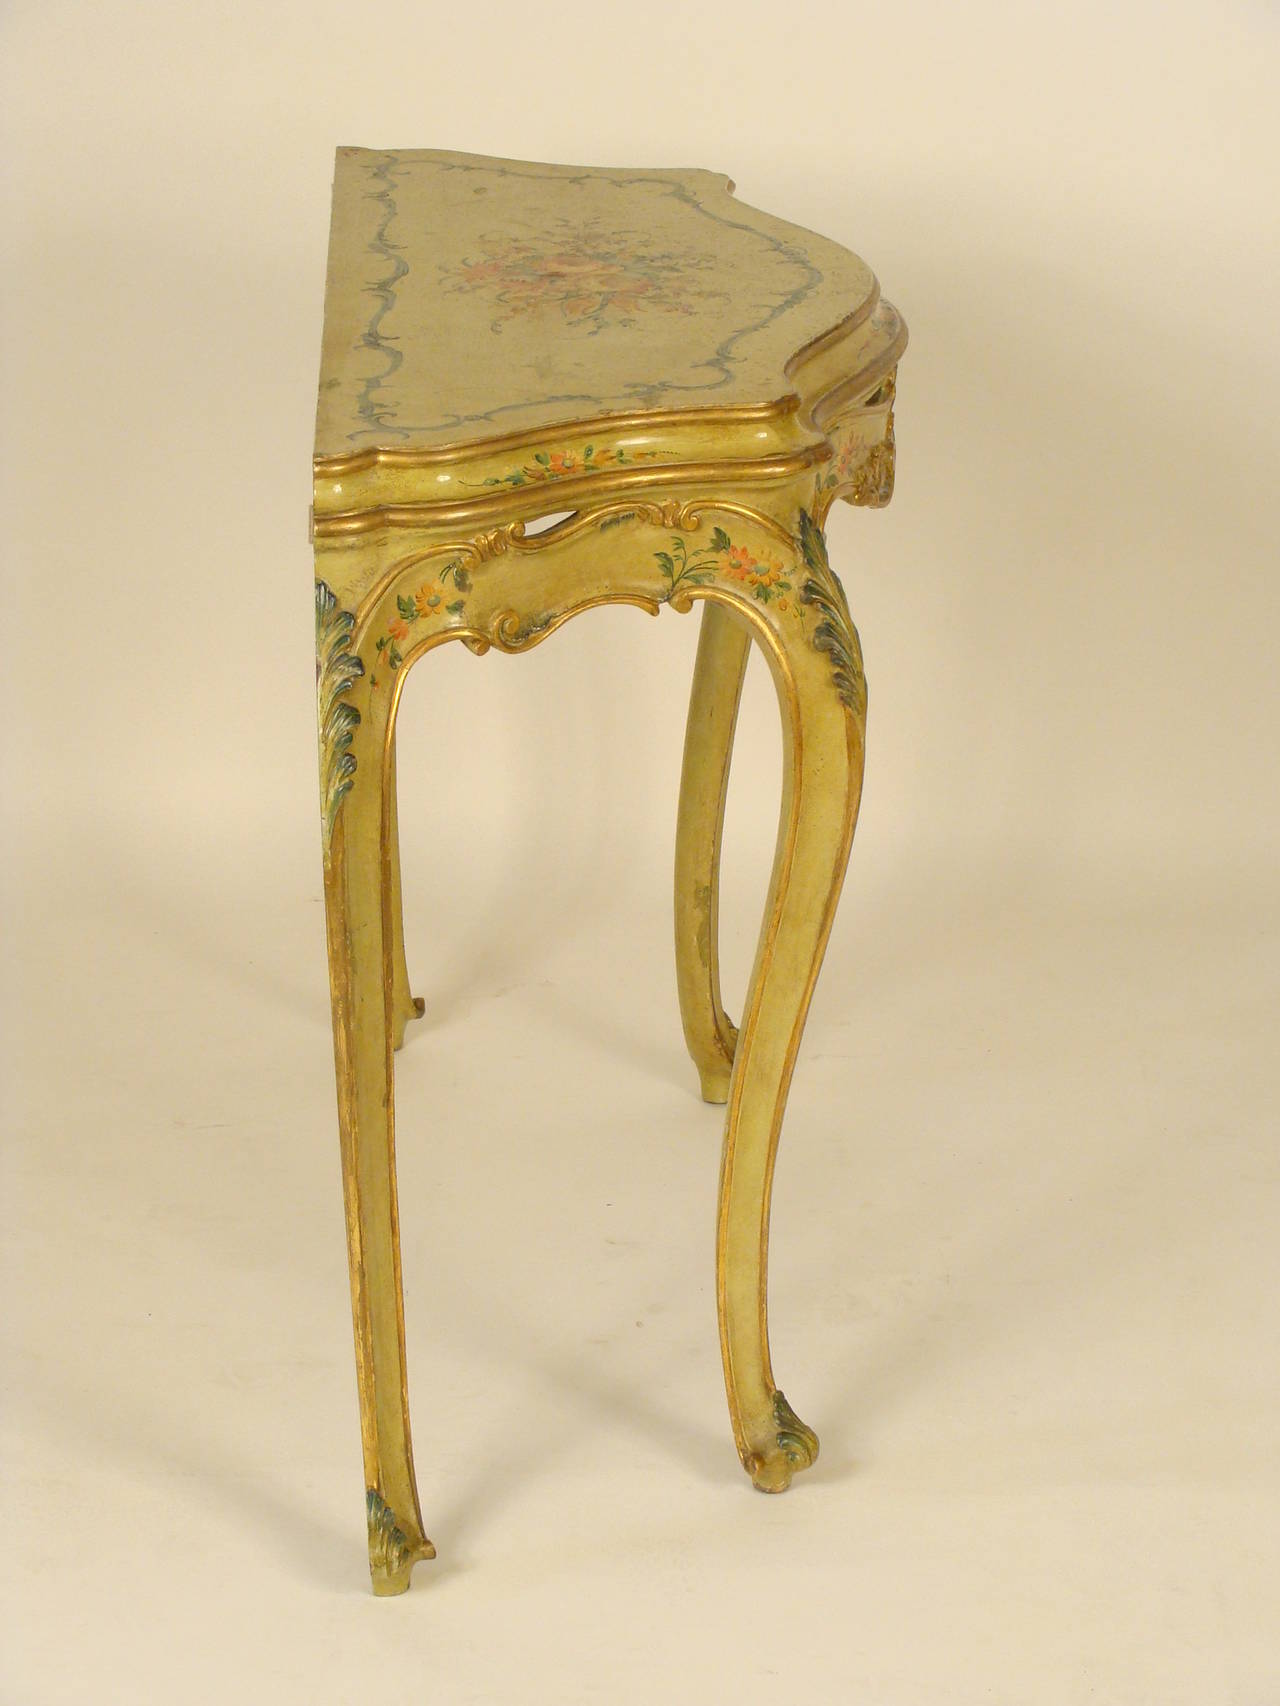 Italian Louis XV style painted and partial gilt console table, mid-20th century. This table has beautiful hand-painted floral decoration and gilt highlights on the top, apron and legs.